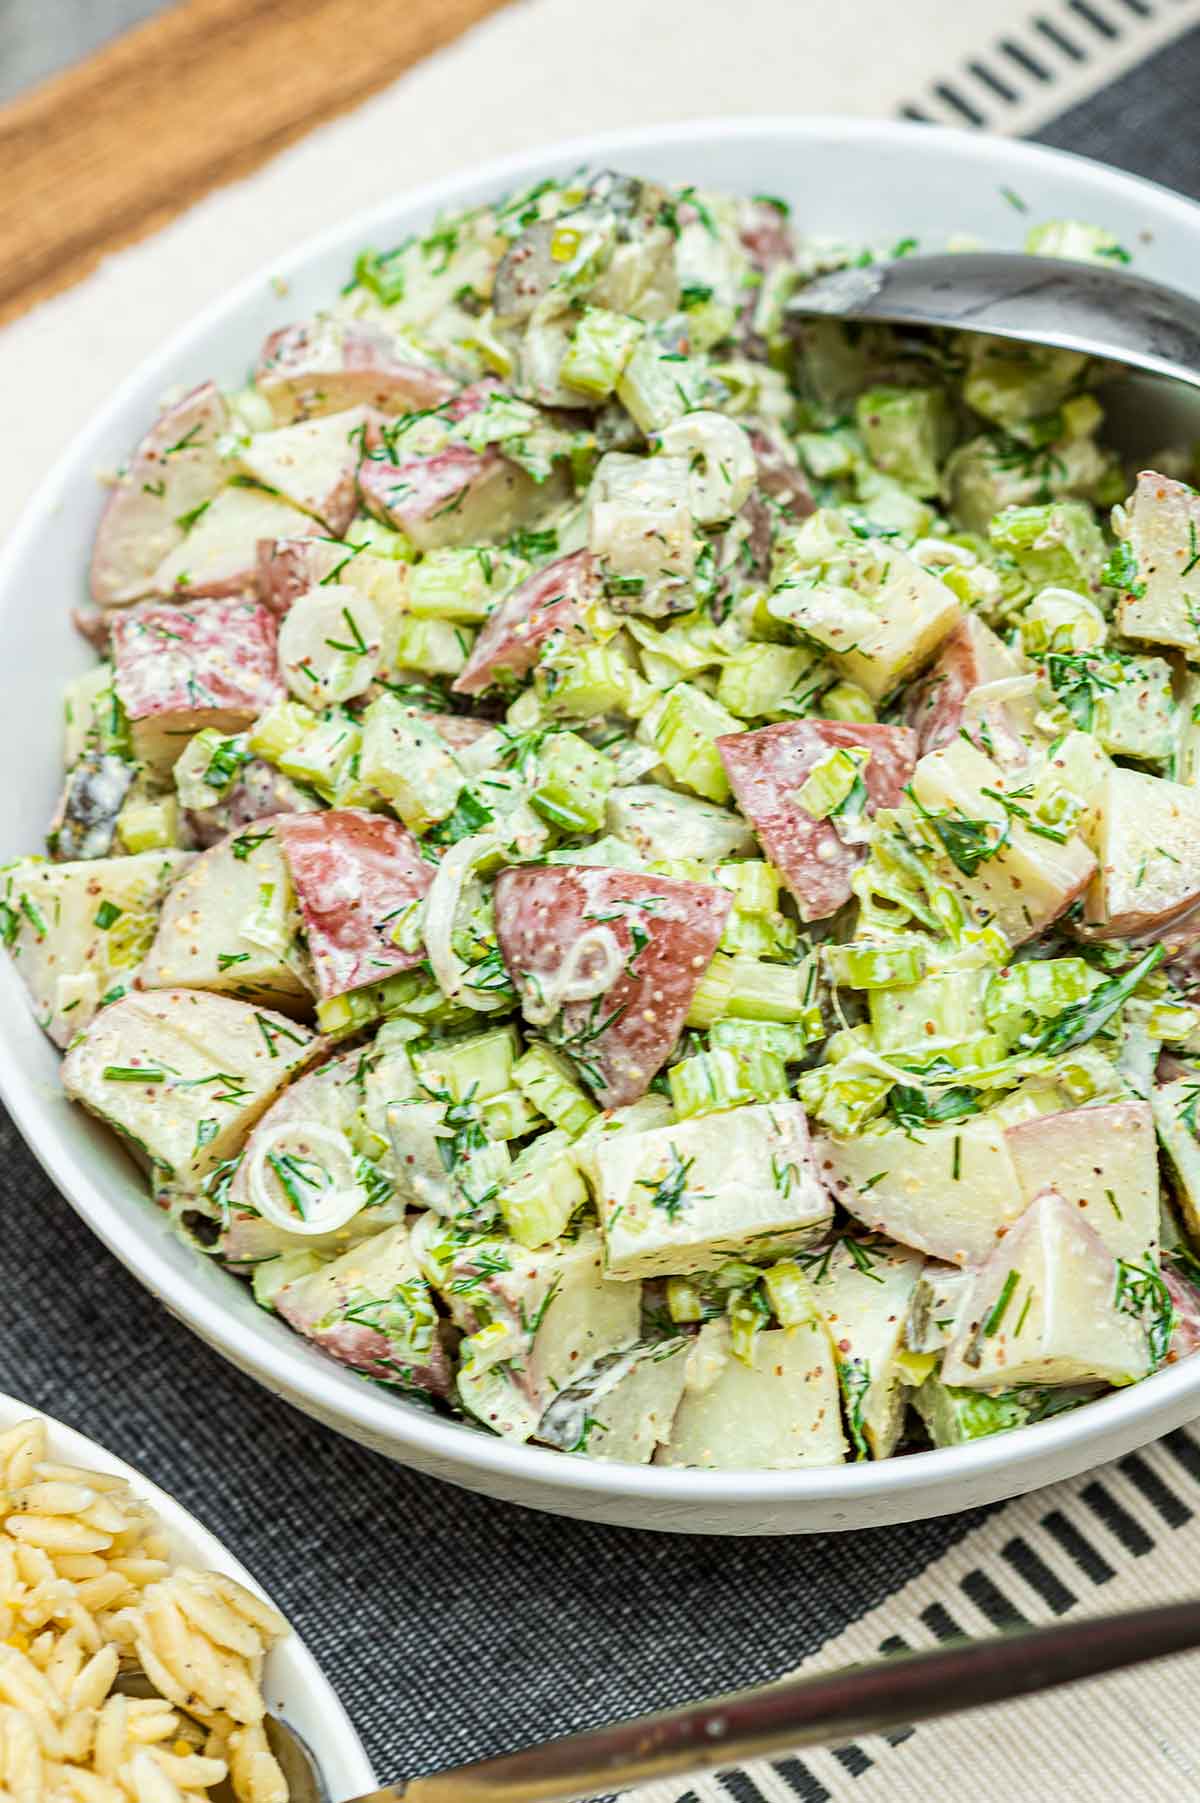 A bowl of dill potato salad on a table.